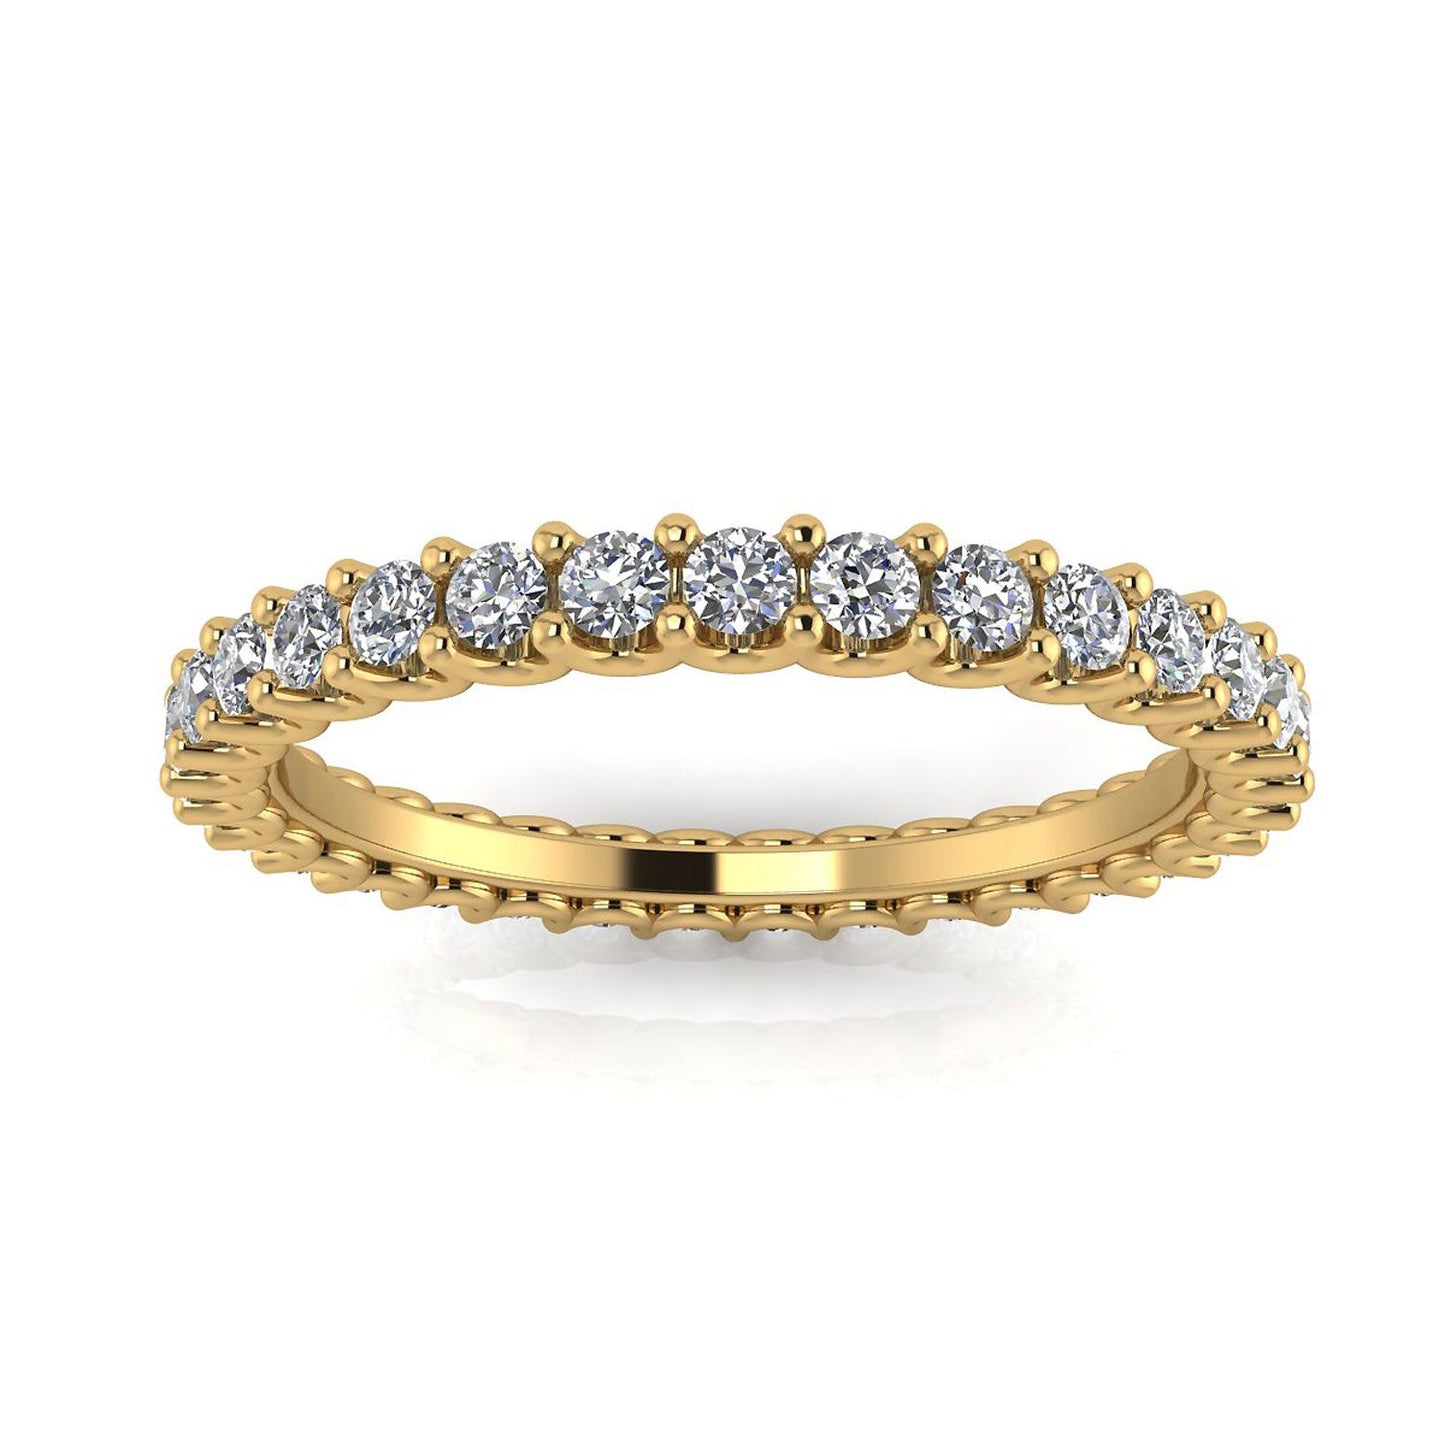 Round Brilliant Cut Diamond Shared Prong Set Eternity Ring In 18k Yellow Gold  (1.43ct. Tw.) Ring Size 5.5